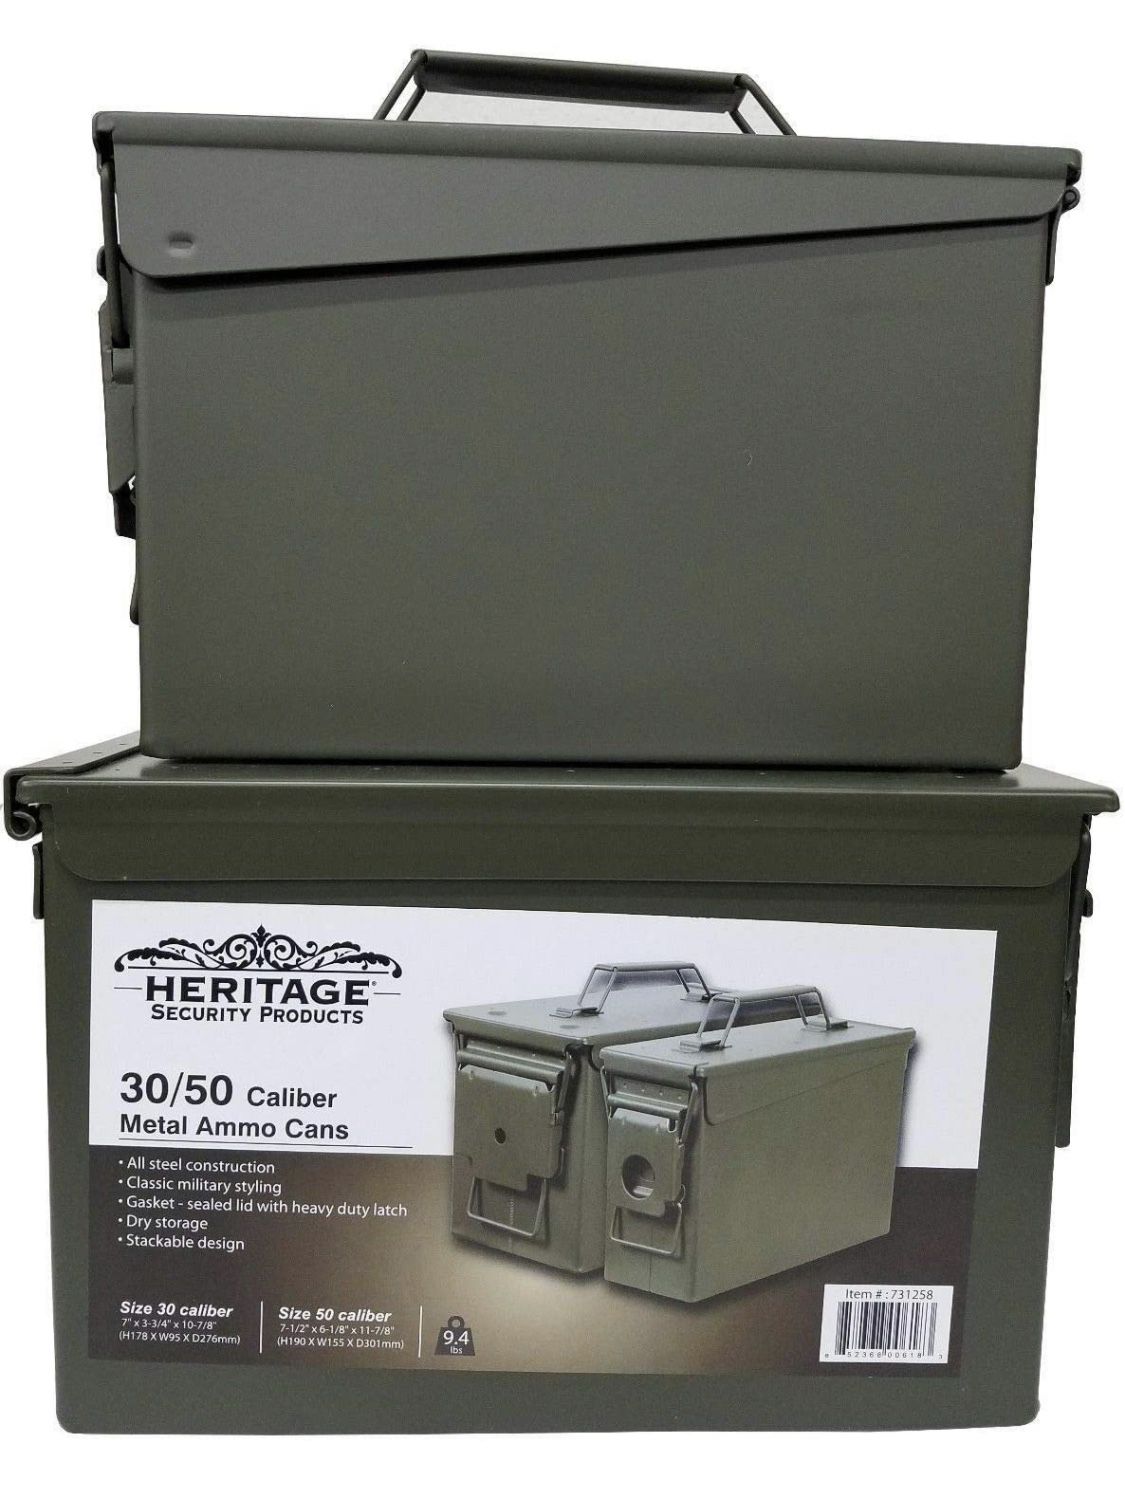 heritage security products 30/50 caliber metal ammo cans